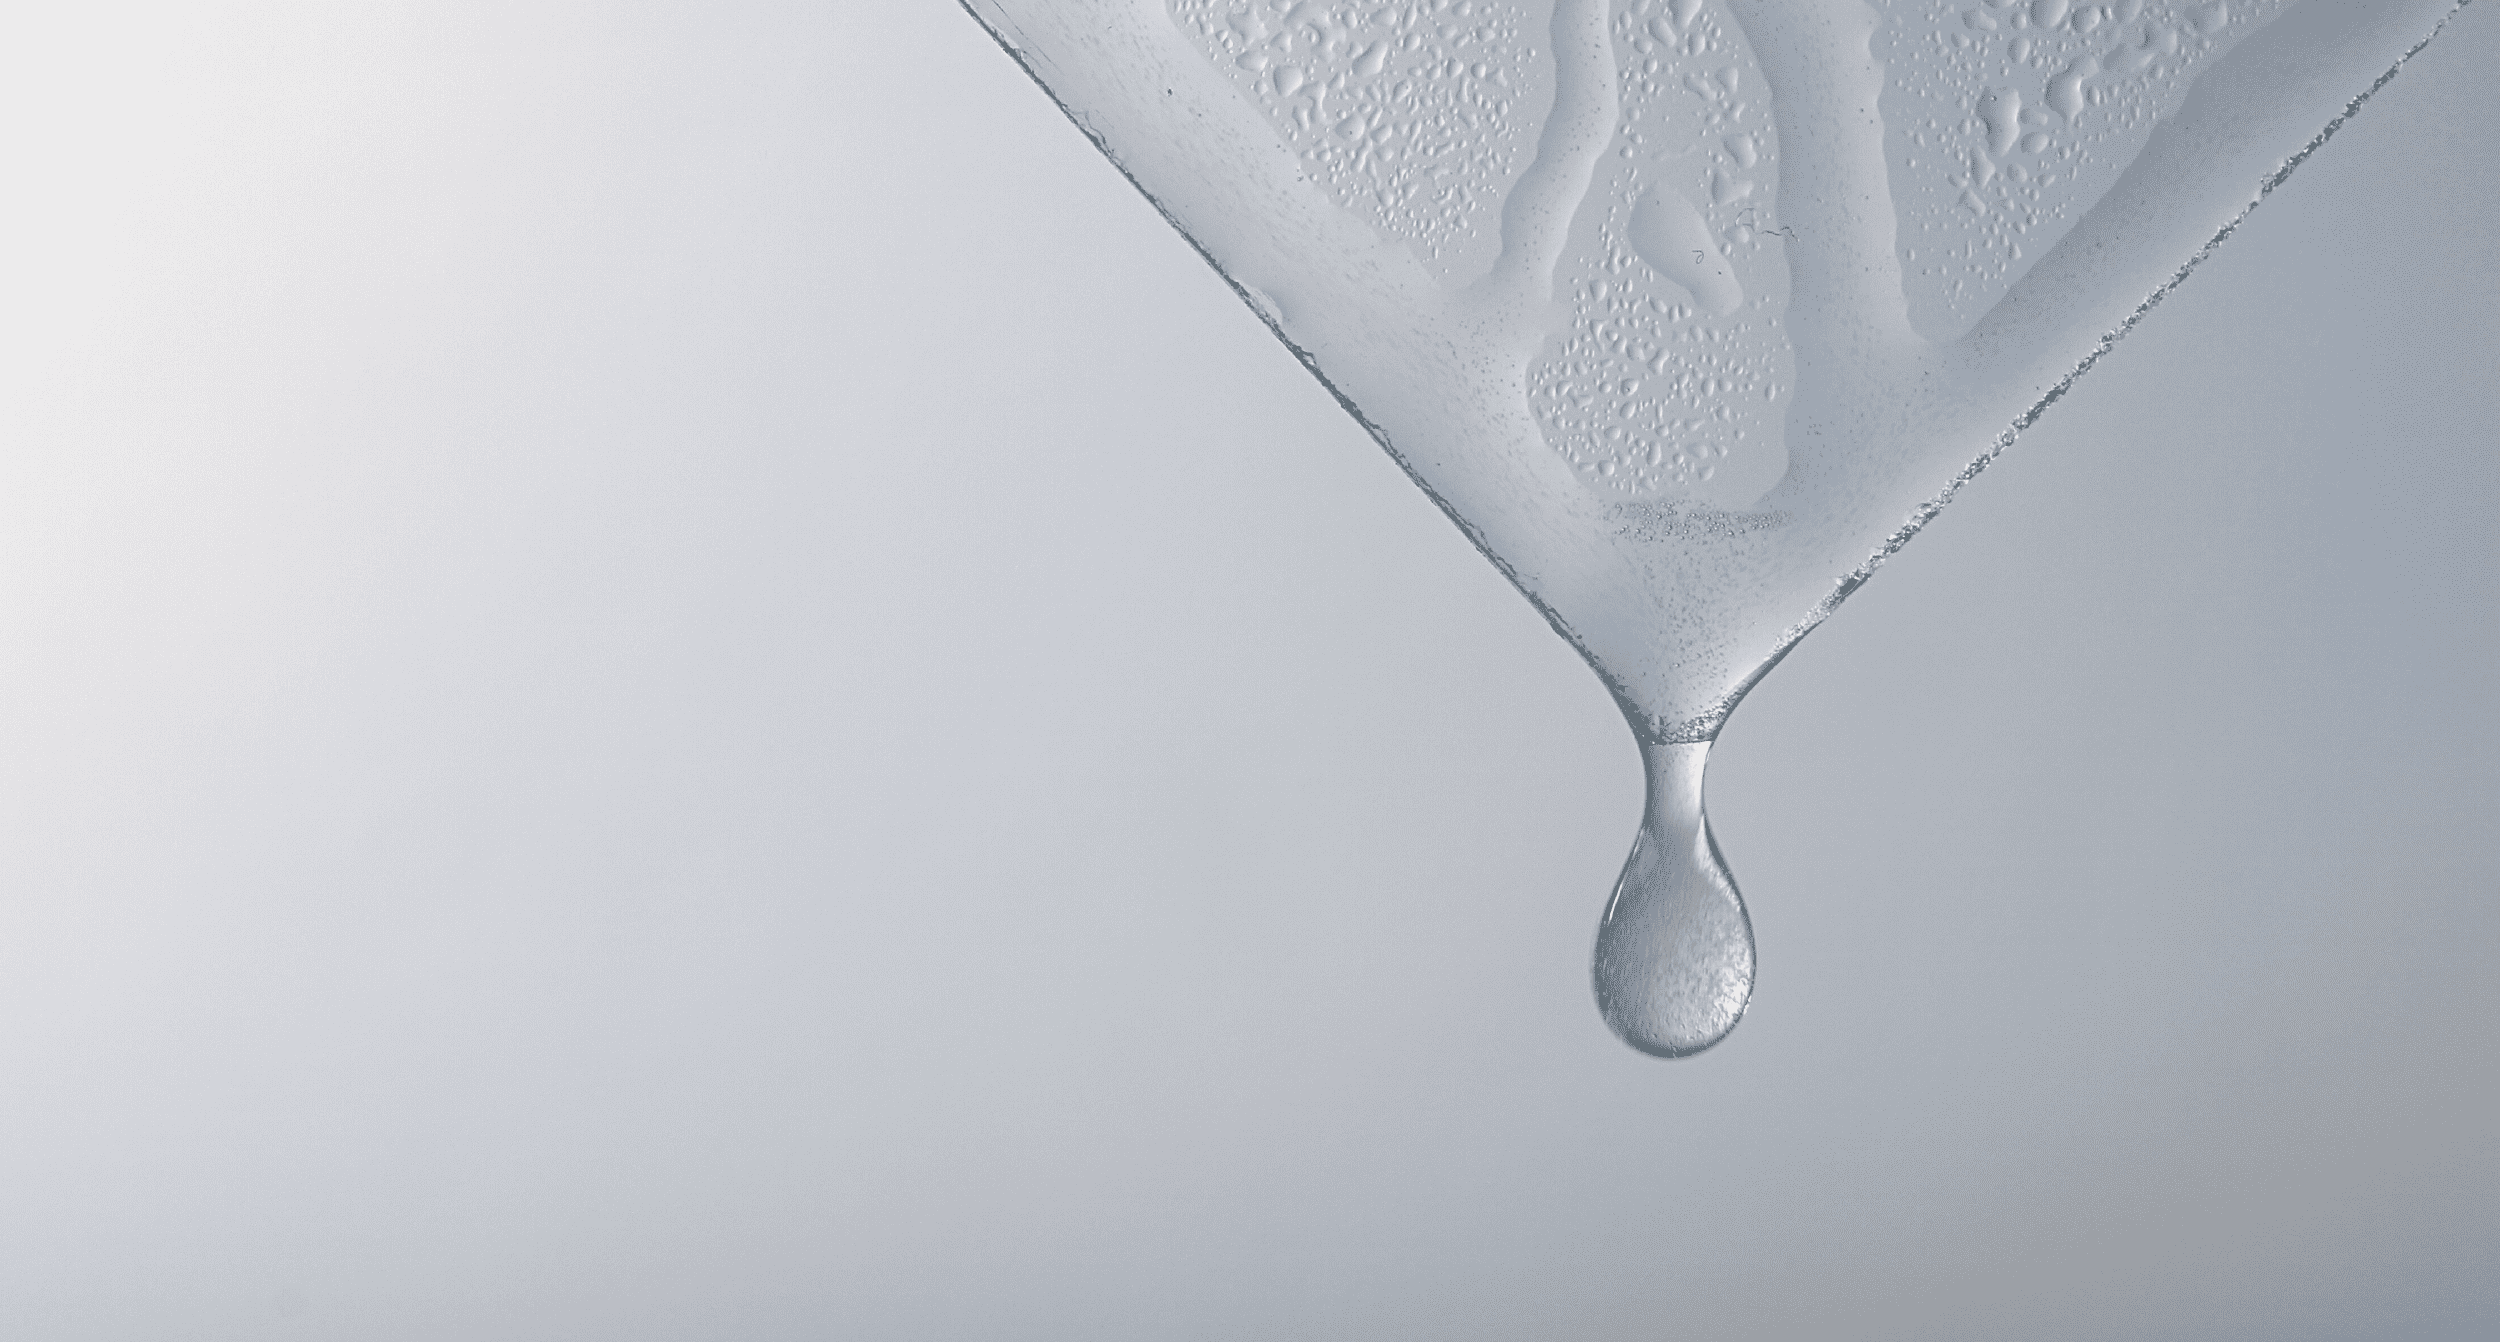 Water droplet signifying humidity and its effects on copier and printer paper